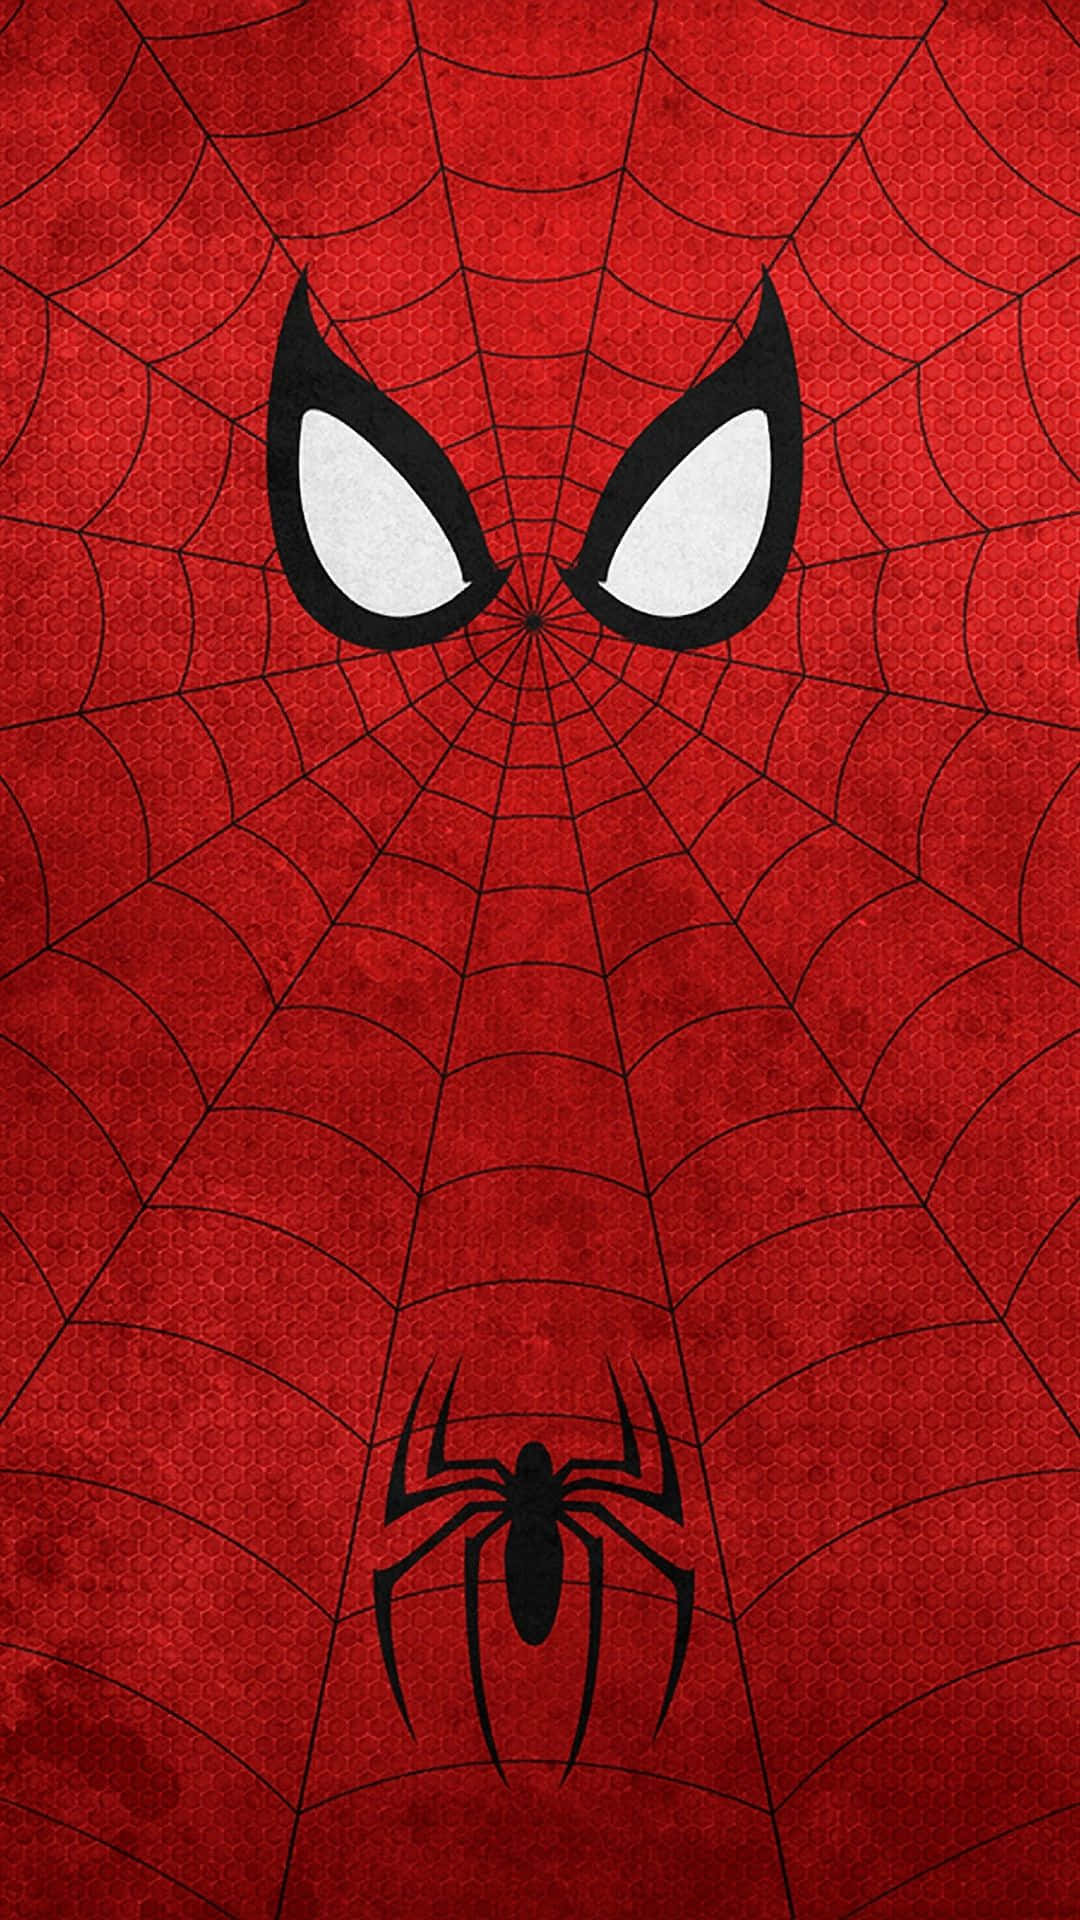 Stay powered up and use the power of Spiderman! Wallpaper